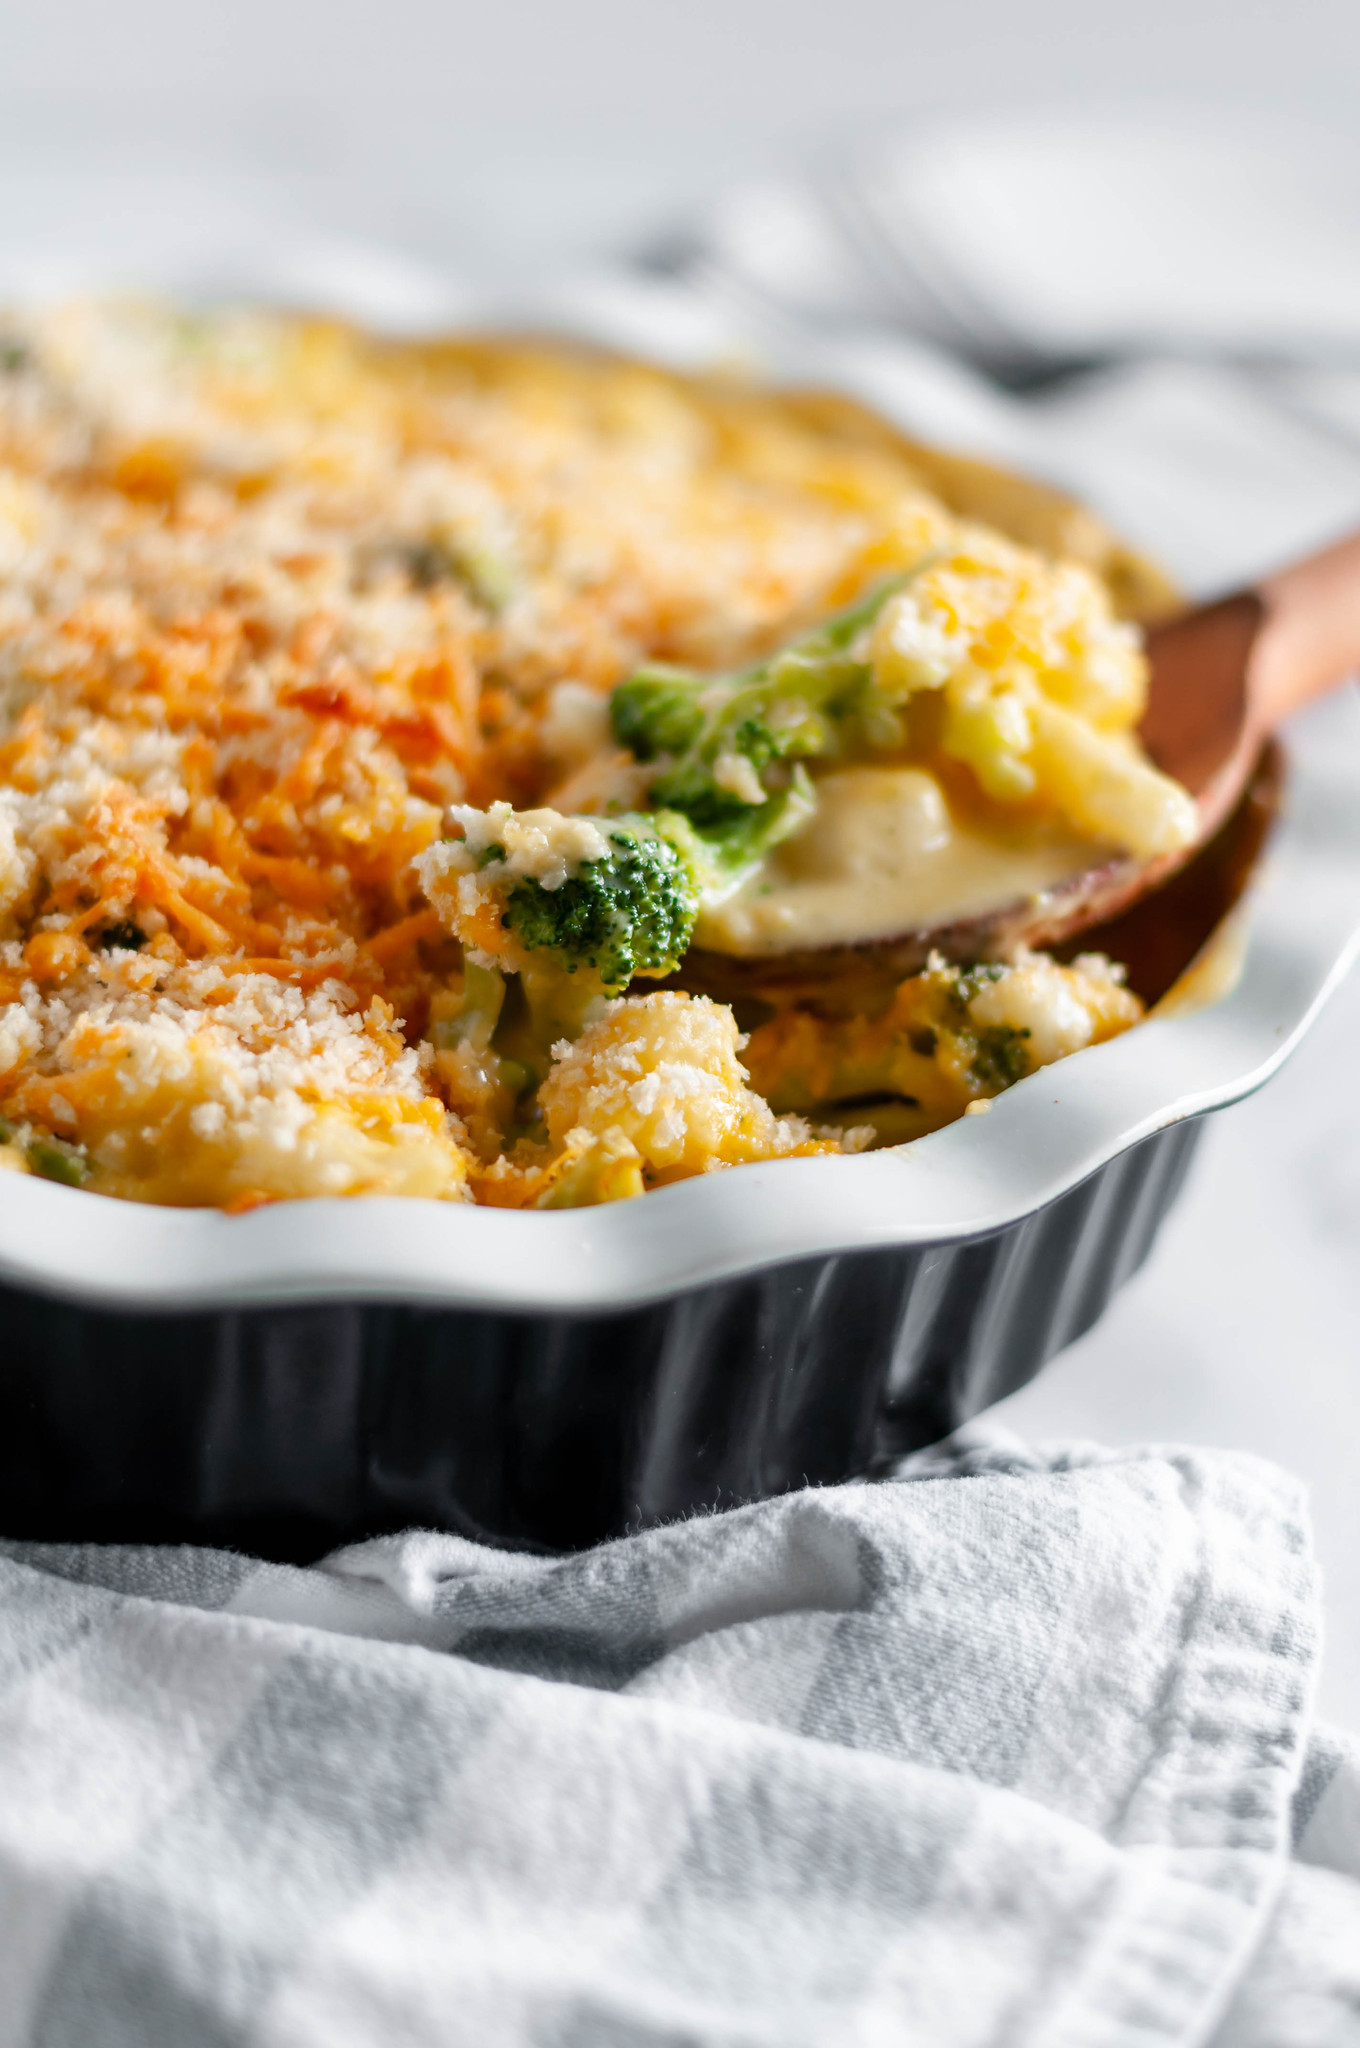 Broccoli and Cauliflower Au Gratin is a favorite side dish for every holiday. Rich, homemade cheese sauce, broccoli and cauliflower with a crispy panko topping.